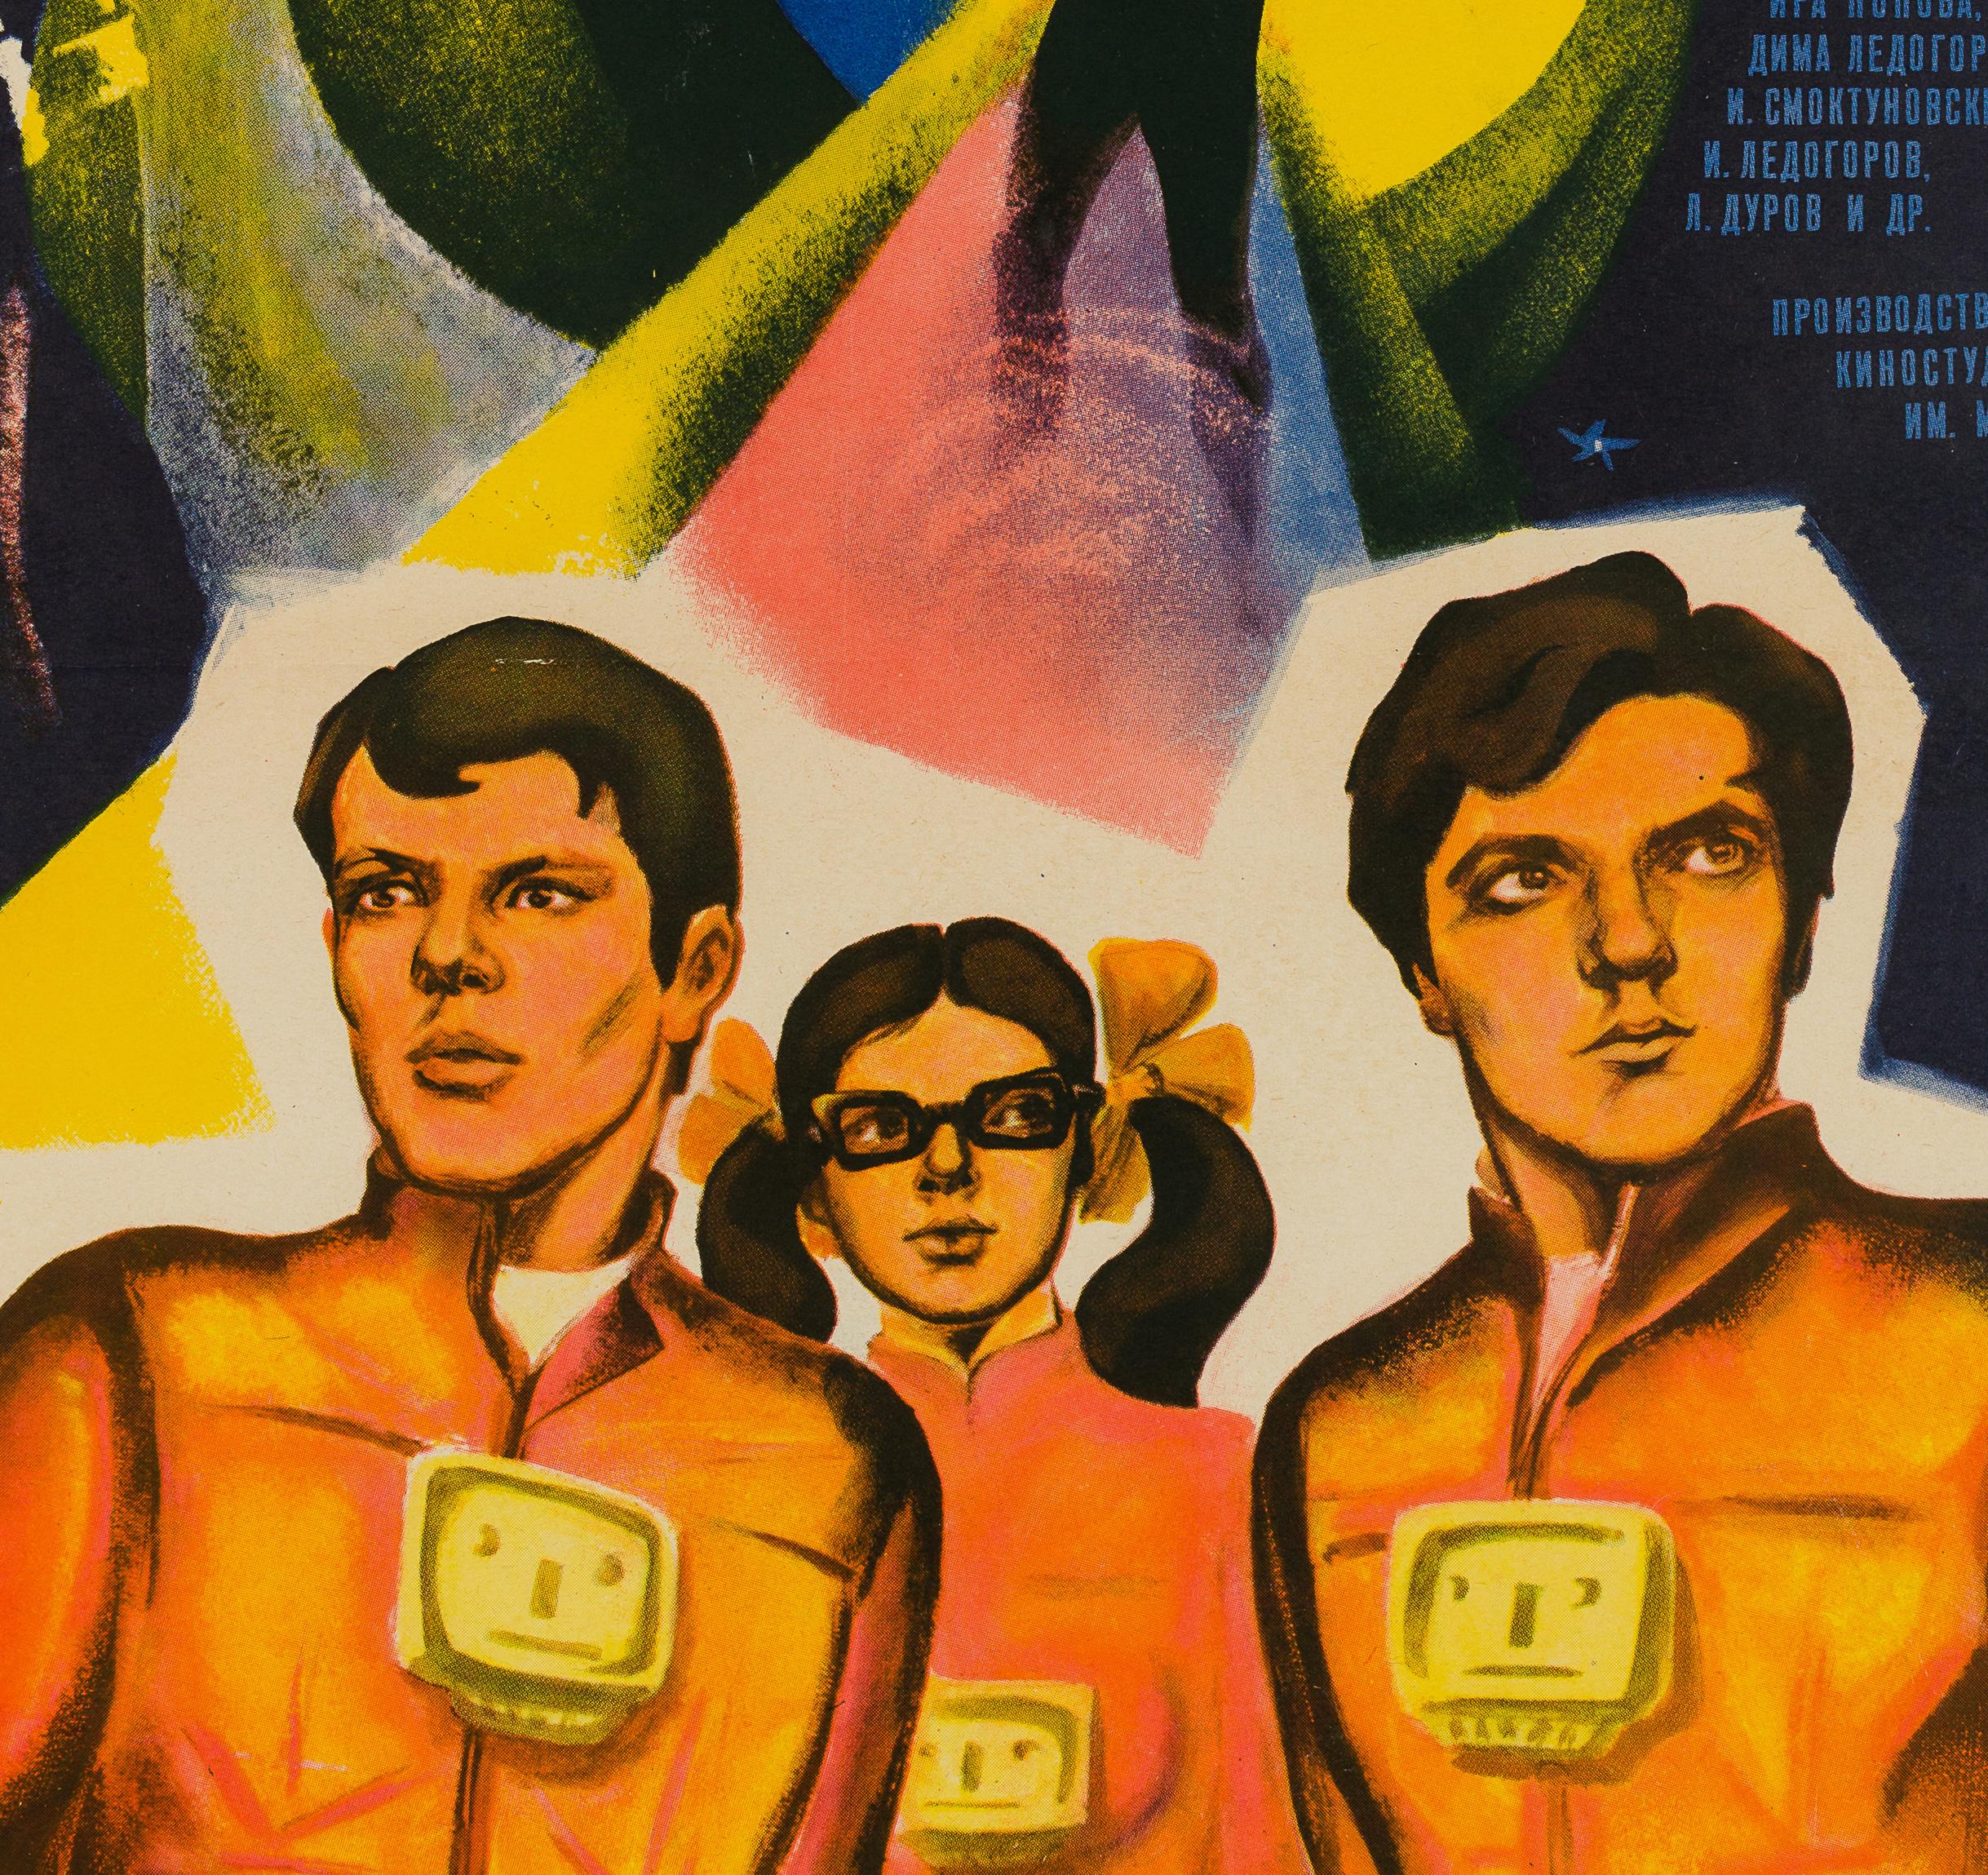 Country-of-original and year-of-release Vintage film poster for Russian sci-fi movie Teens in the Universe.

Actual poster size 16 3/4 x 25 1.2 inches.